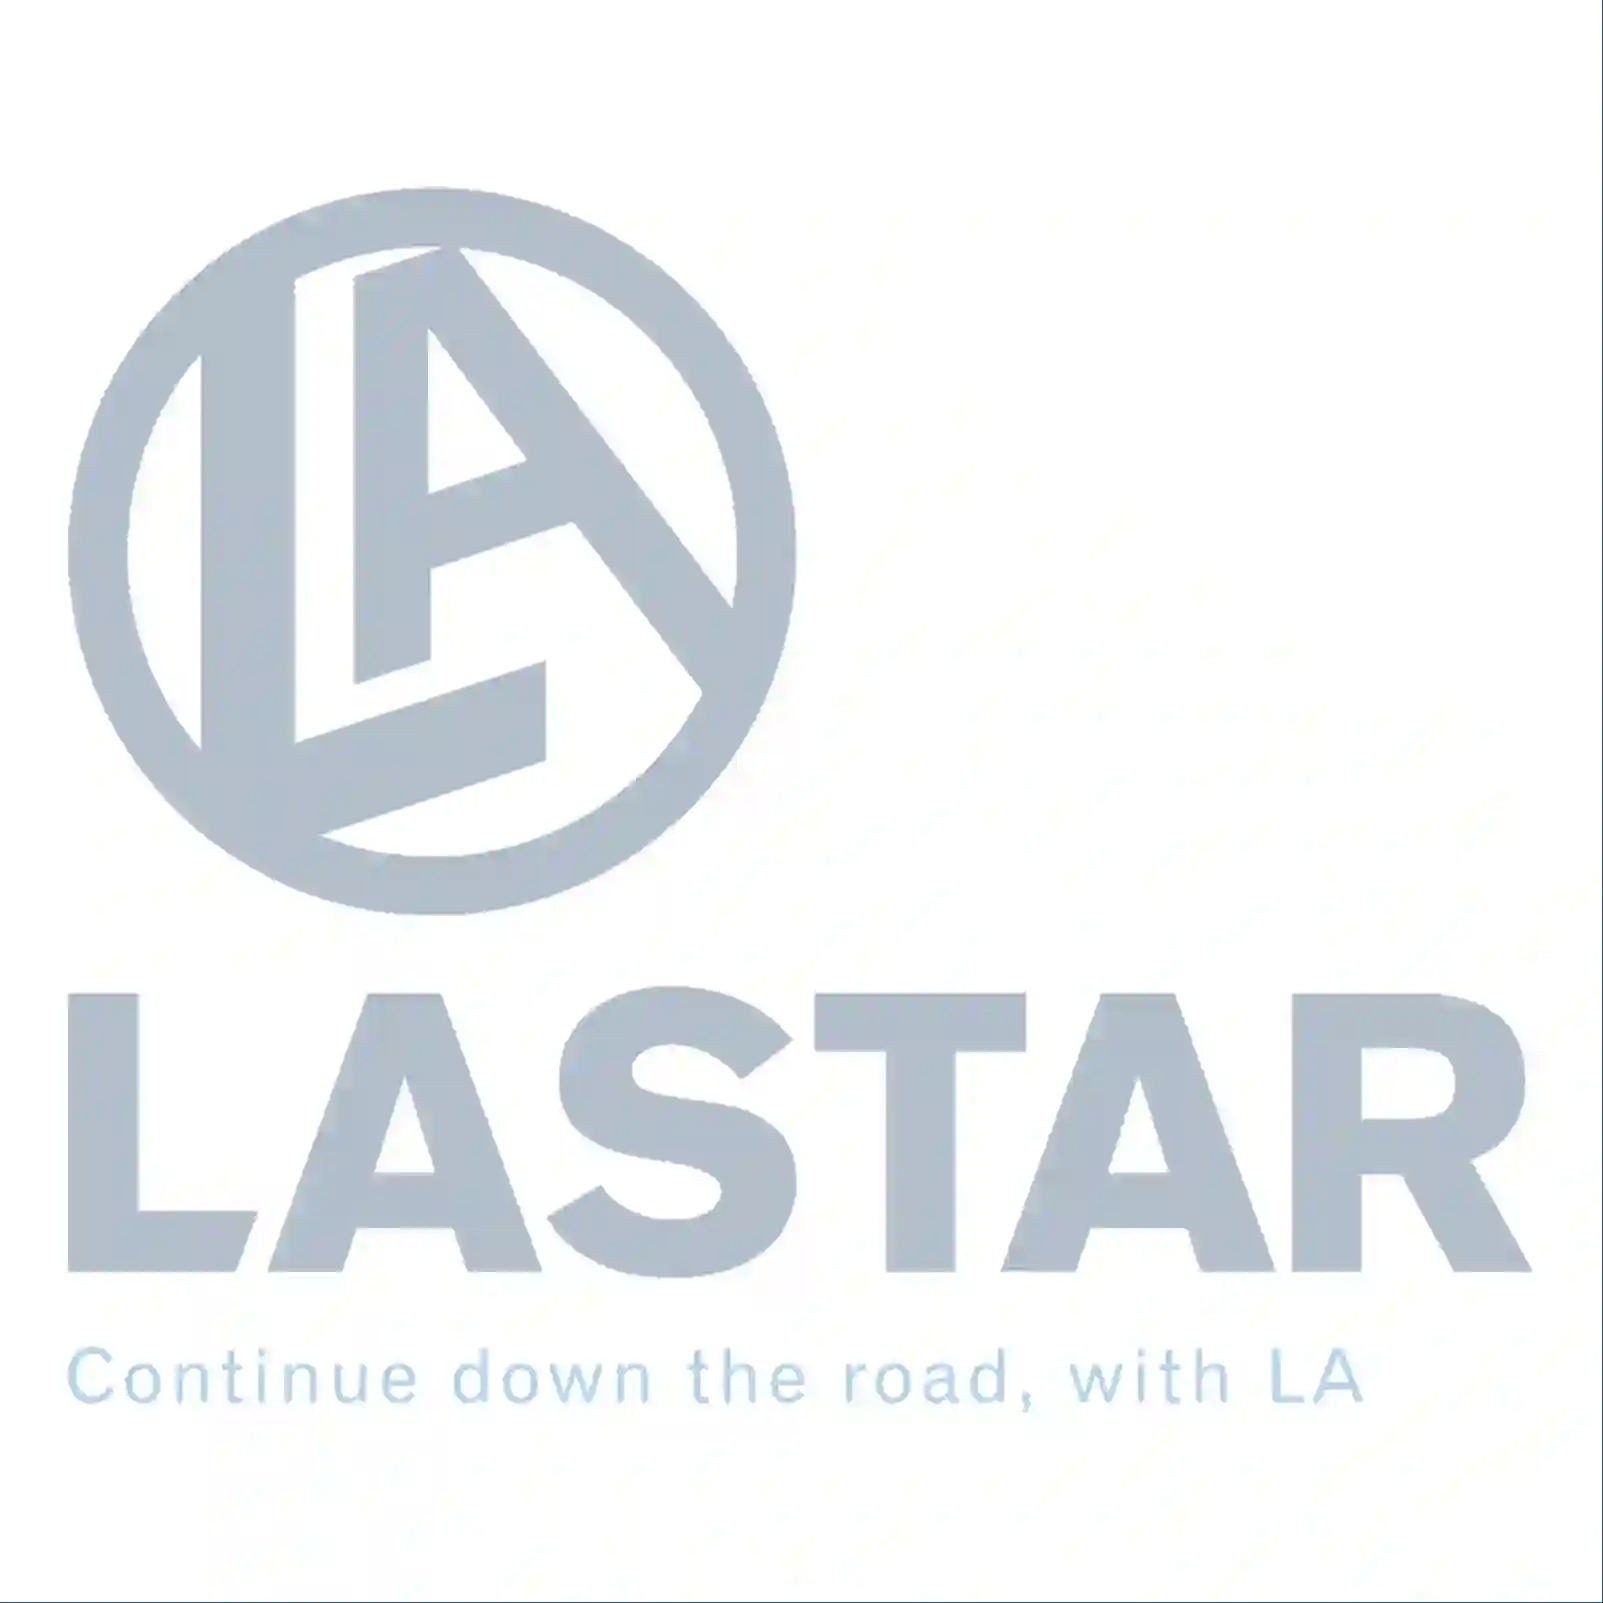  Cover, engine hood, without washing nozzles || Lastar Spare Part | Truck Spare Parts, Auotomotive Spare Parts